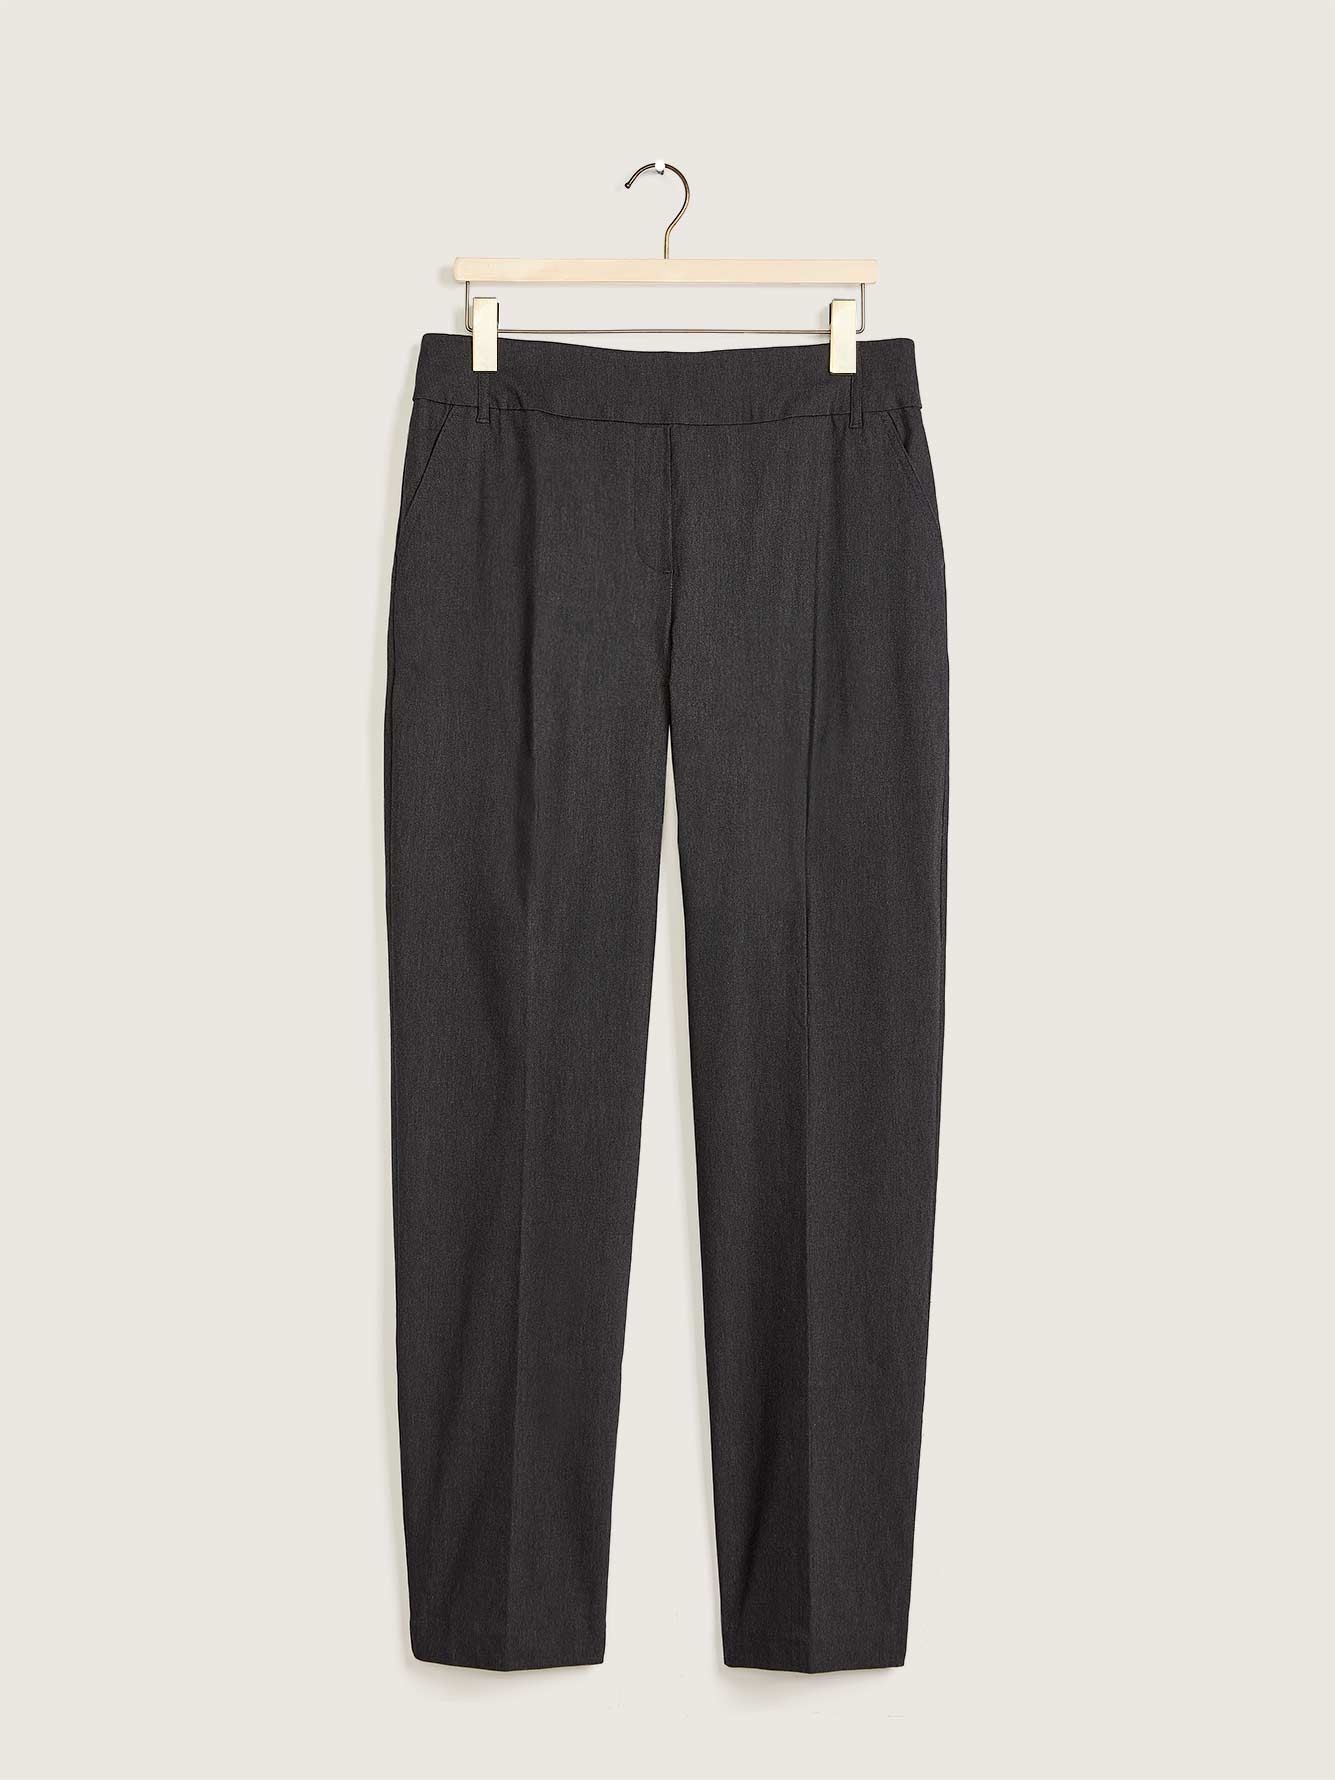 Petite, Straight Leg Solid Pant - In Every Story